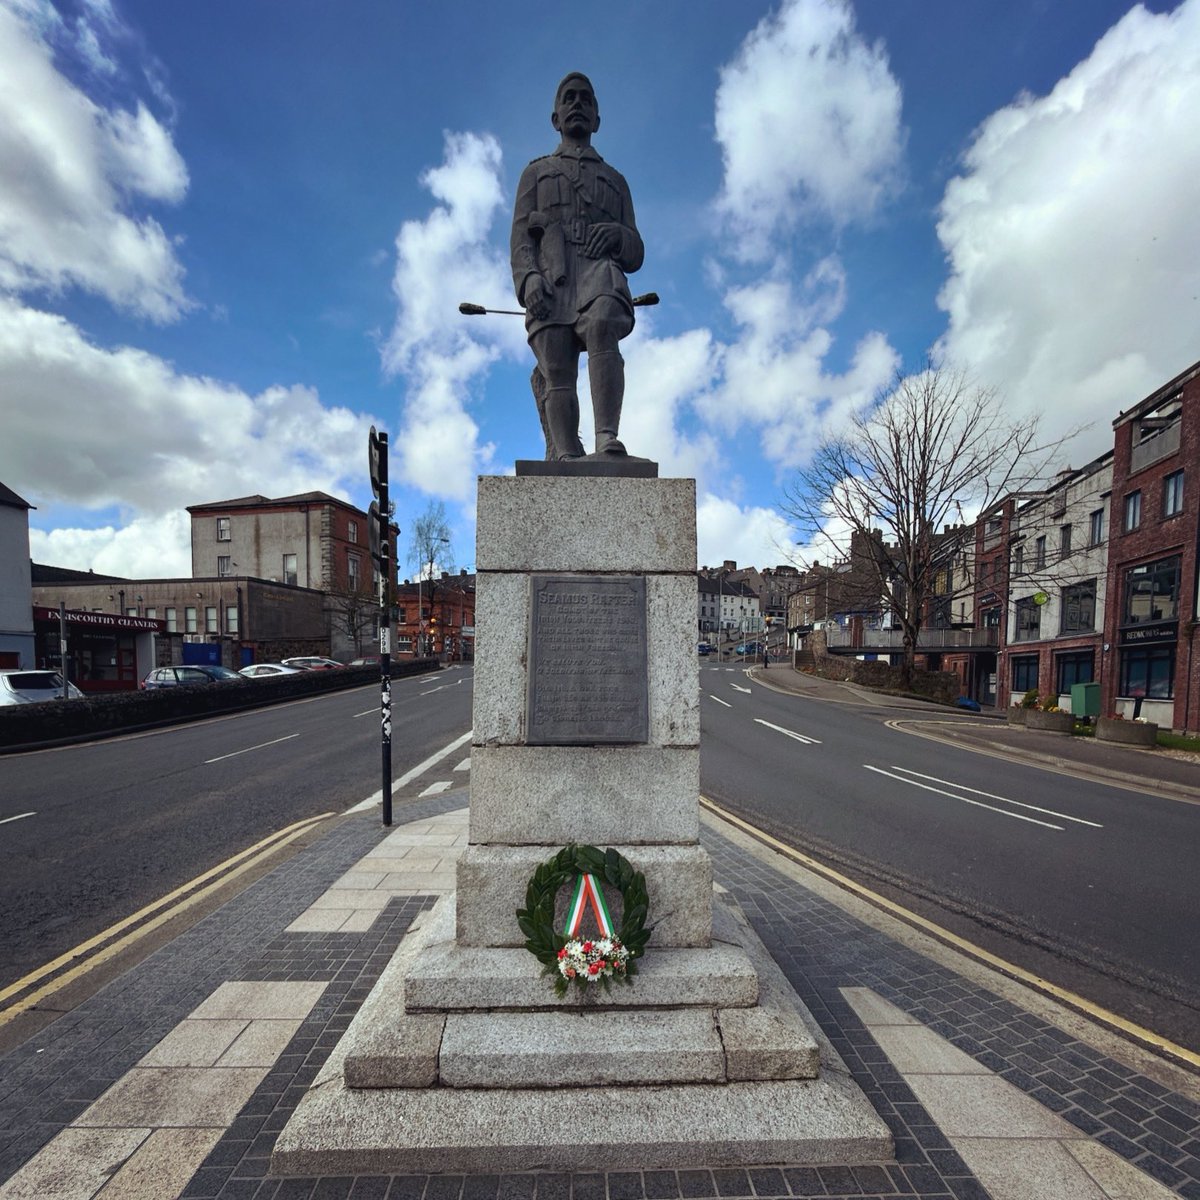 Enniscorthy - 🇮🇪🇮🇪🇮🇪Remembering the 7 days the tricolor flew proudly over Enniscorthy 108 years ago at Easter 1916. Well done to all the organisers and volunteers and Council staff and crews involved in today’s commemoration event.